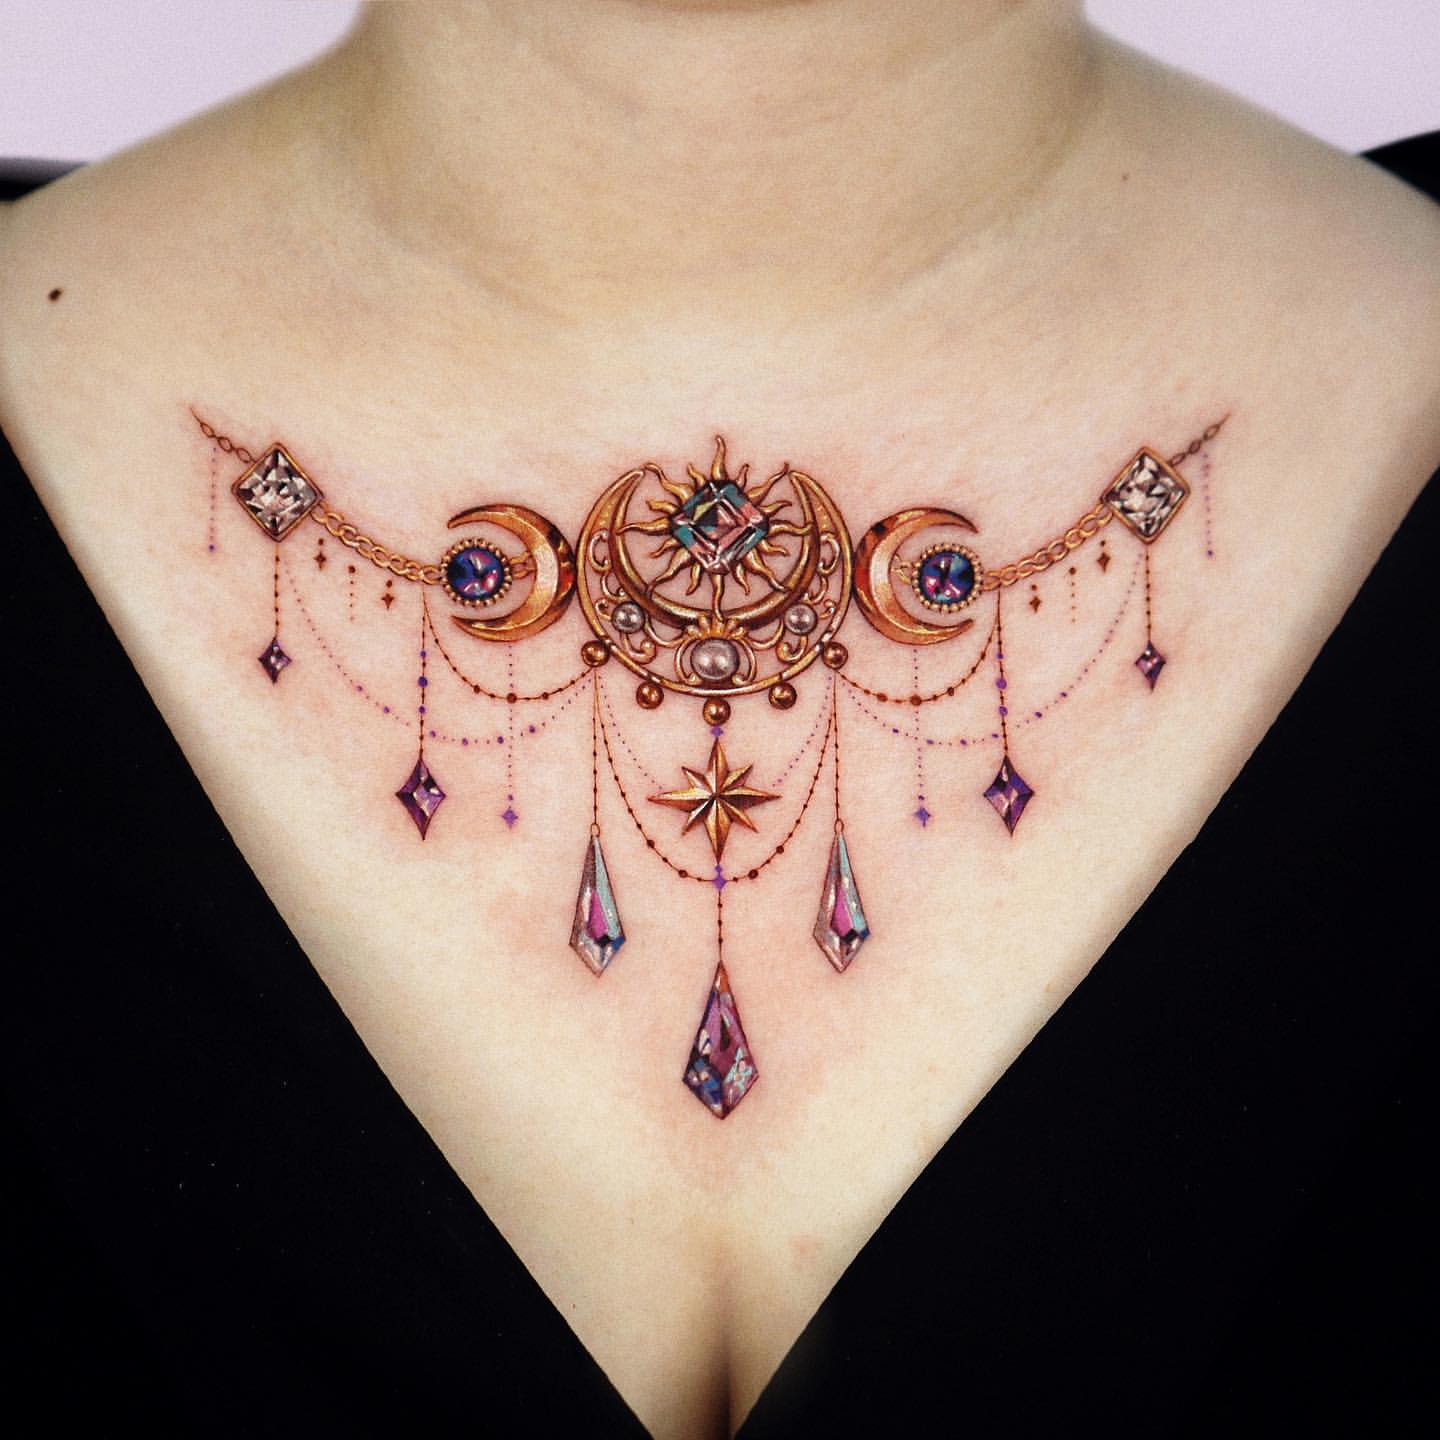 Chest Tattoos Ideas for Women 8